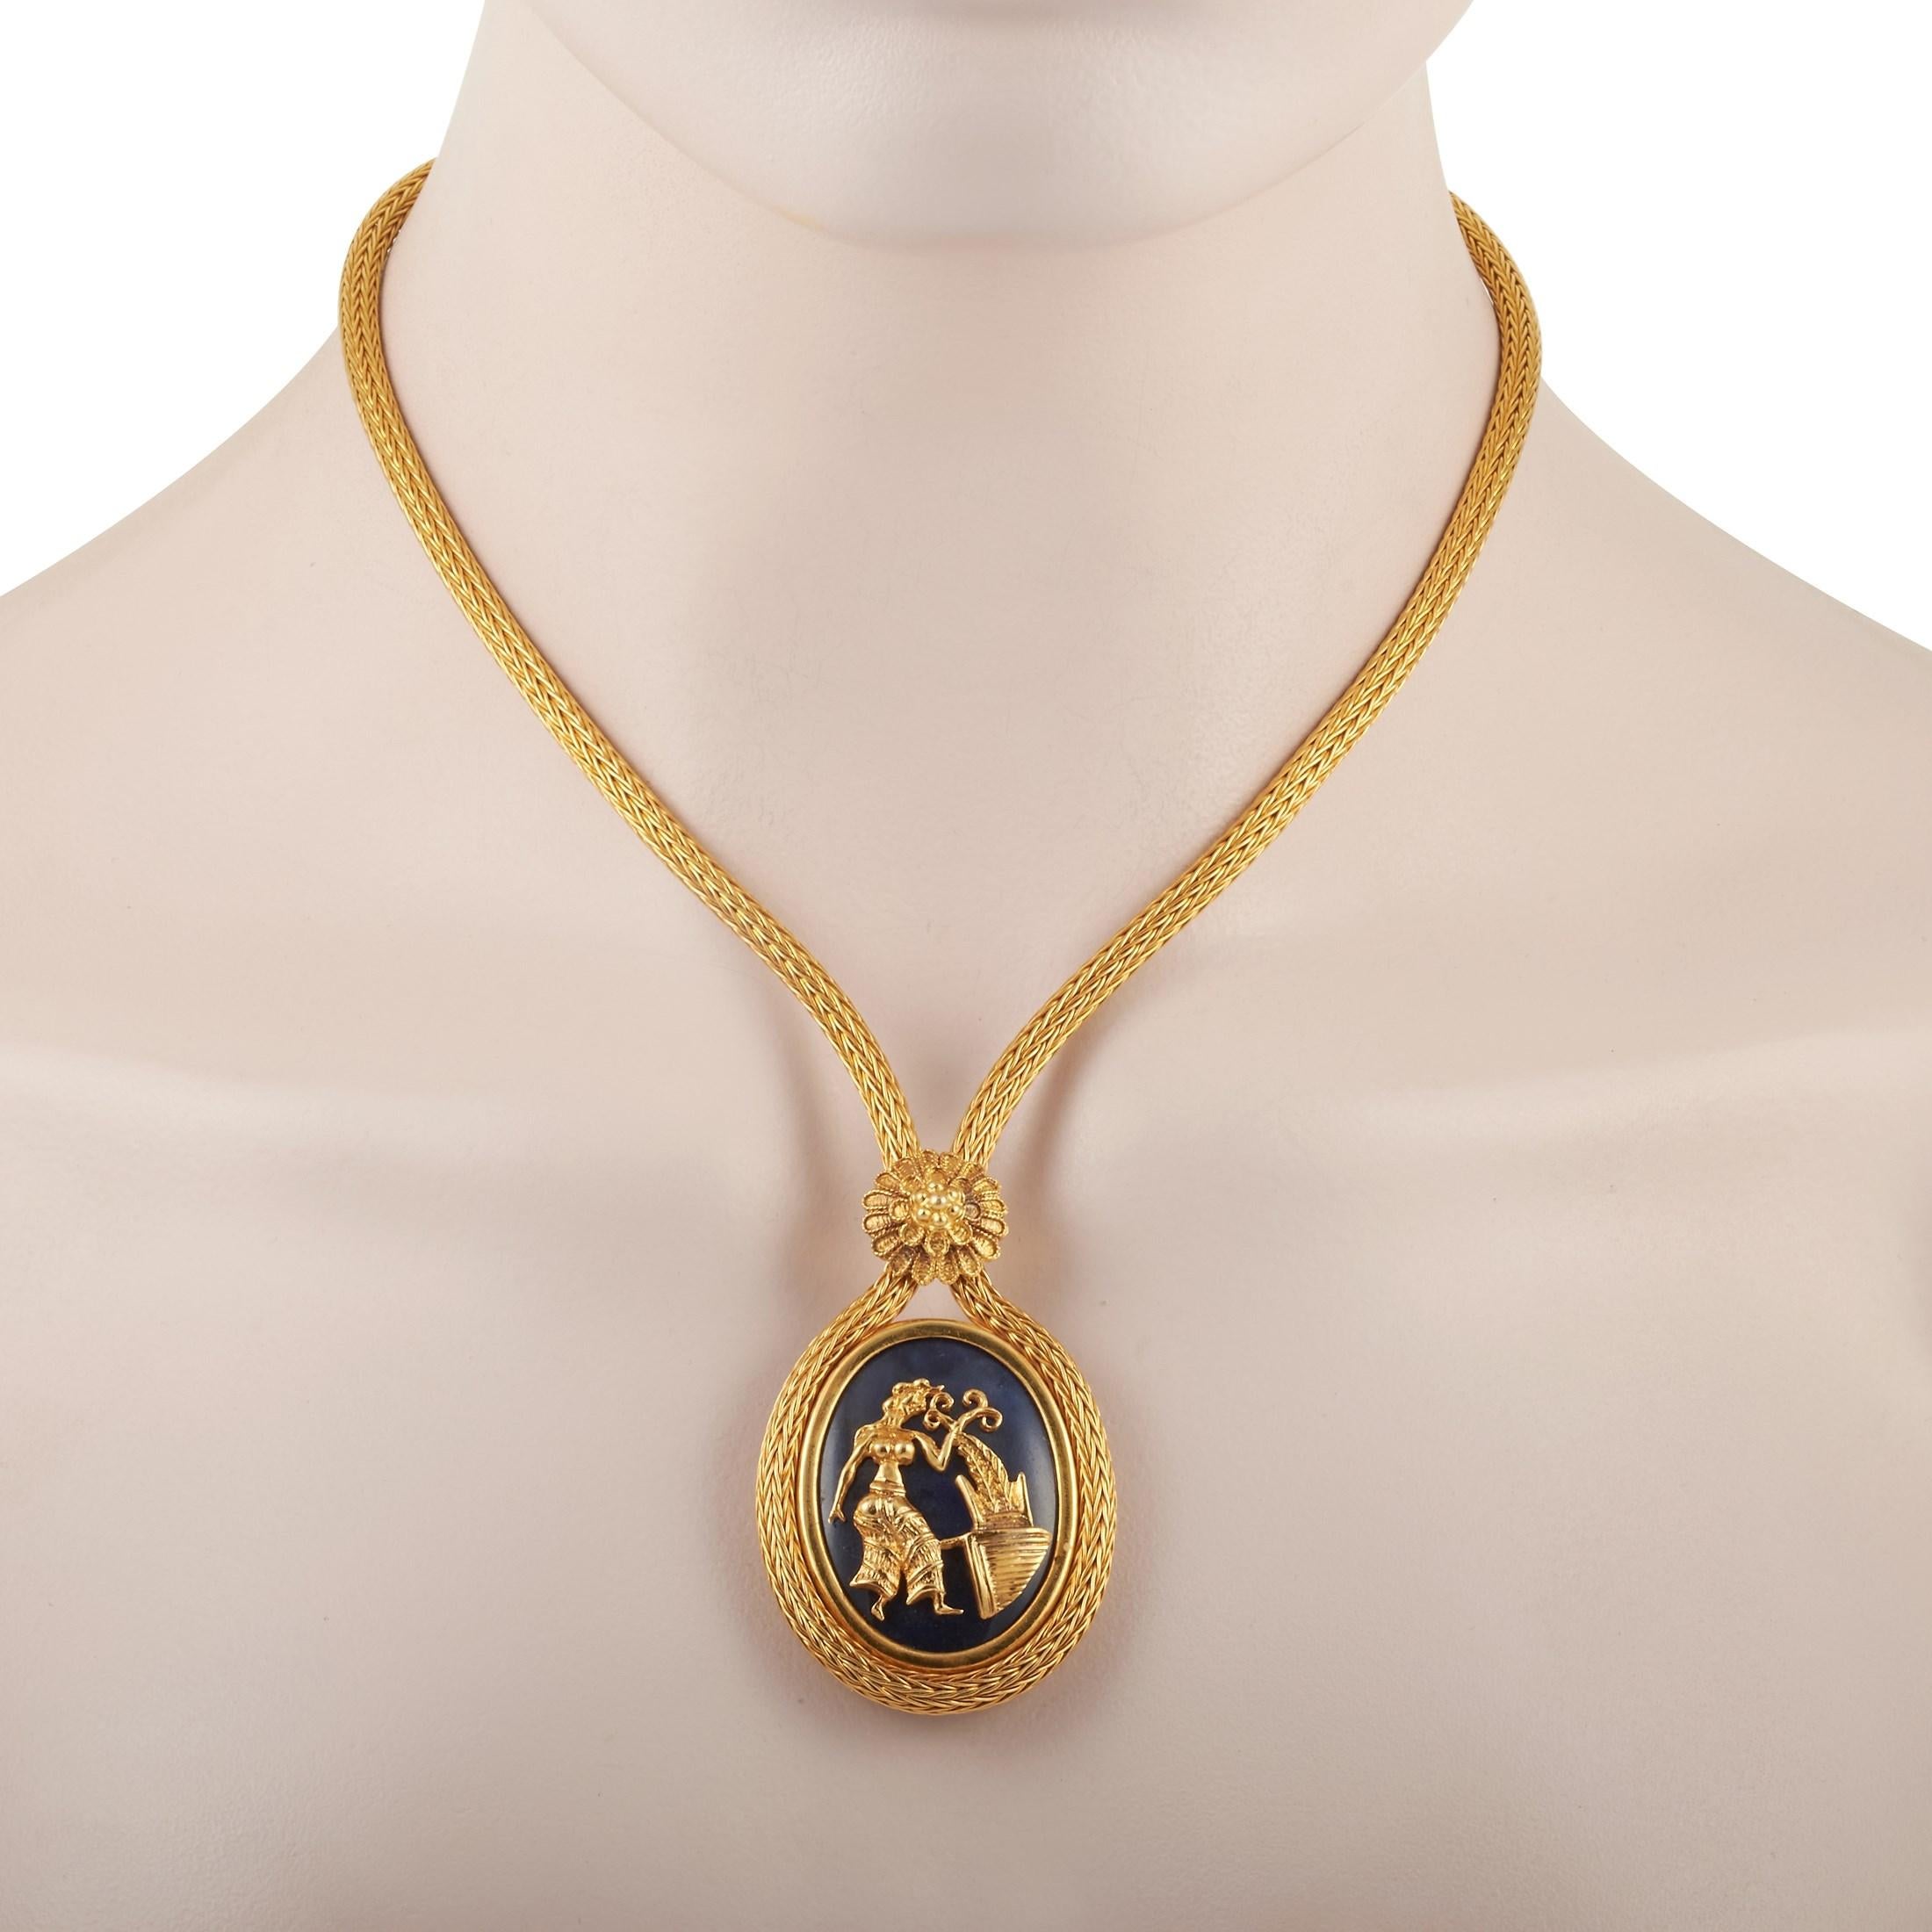 Each piece of jewelry tells an intriguing story, and this Ilias Lalaounis piece is no different. Beautifully crafted with 18K yellow gold, the necklace weighs 66.3 grams. Boasting a stunning lapis pendant, its chain measures 17 inches in length,